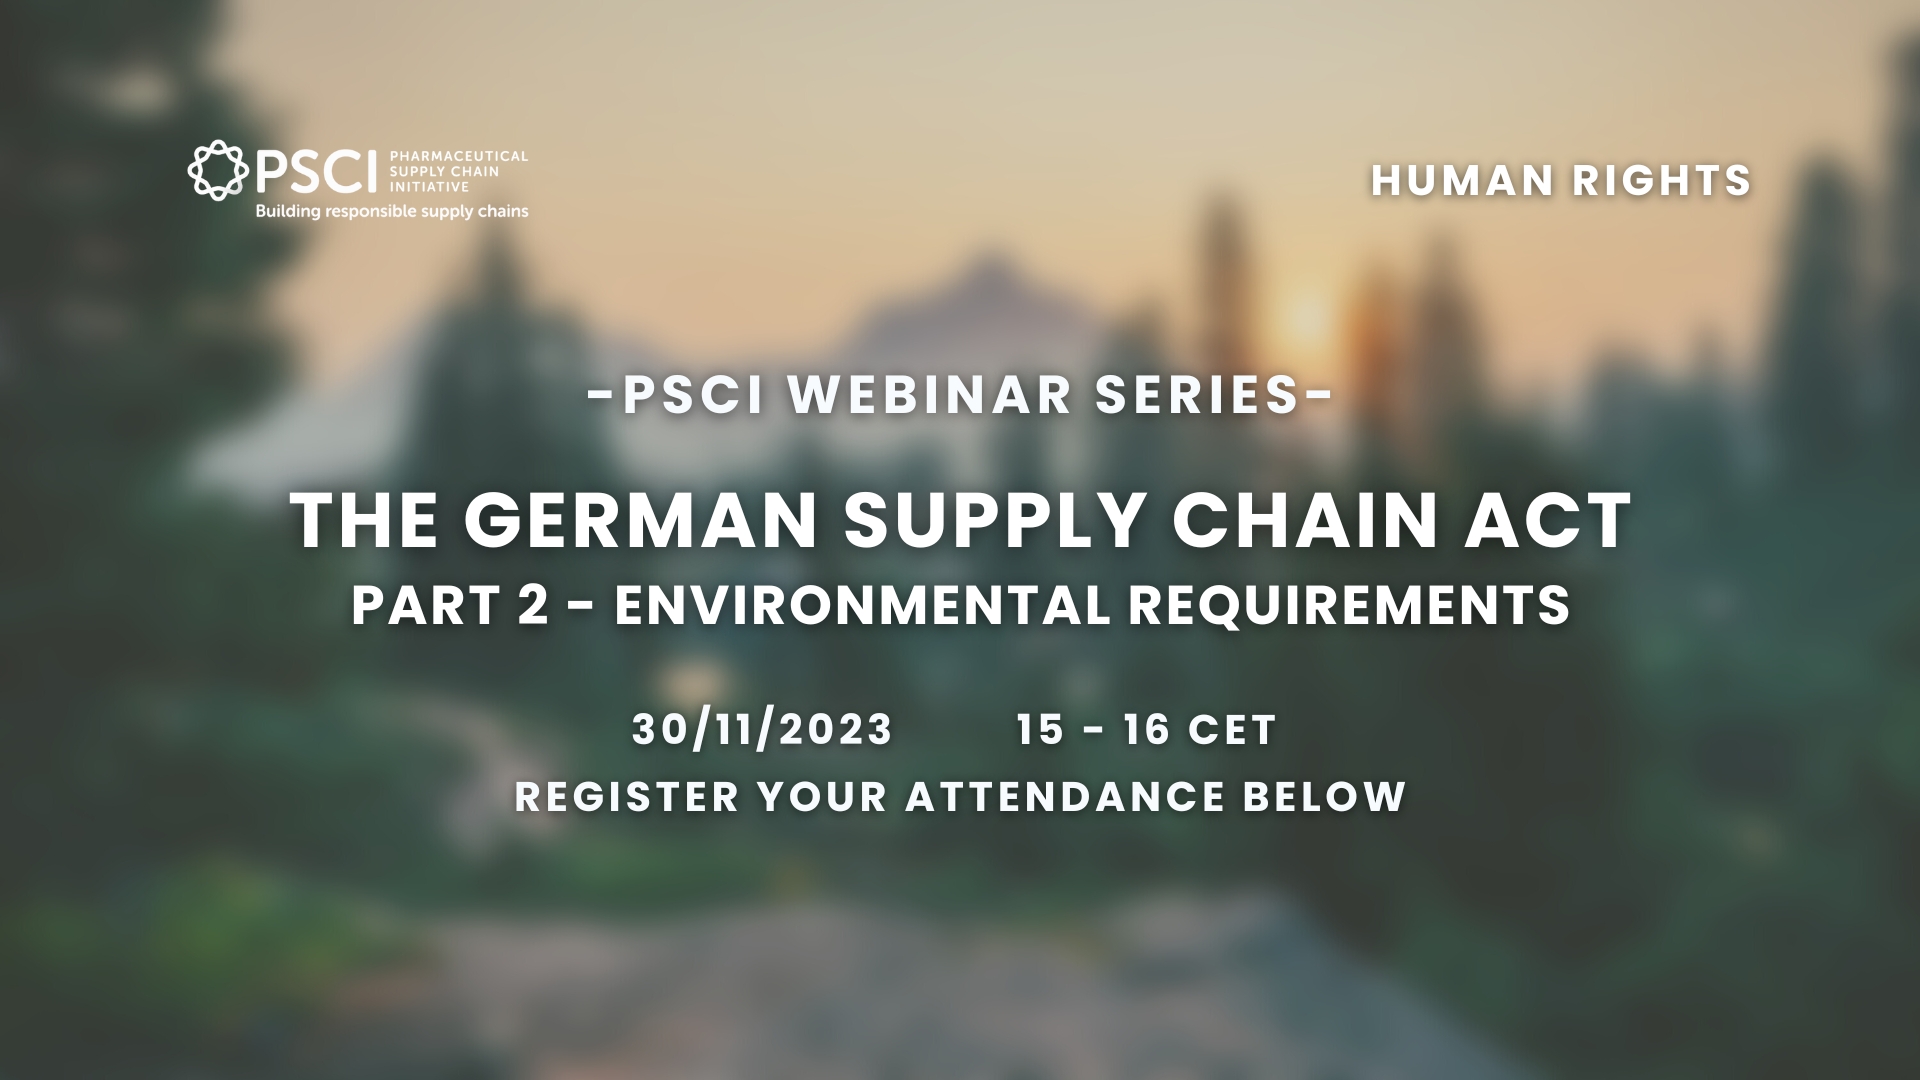 PSCI Webinar: The German Supply Chain Act - Part 2, Environmental Requirements